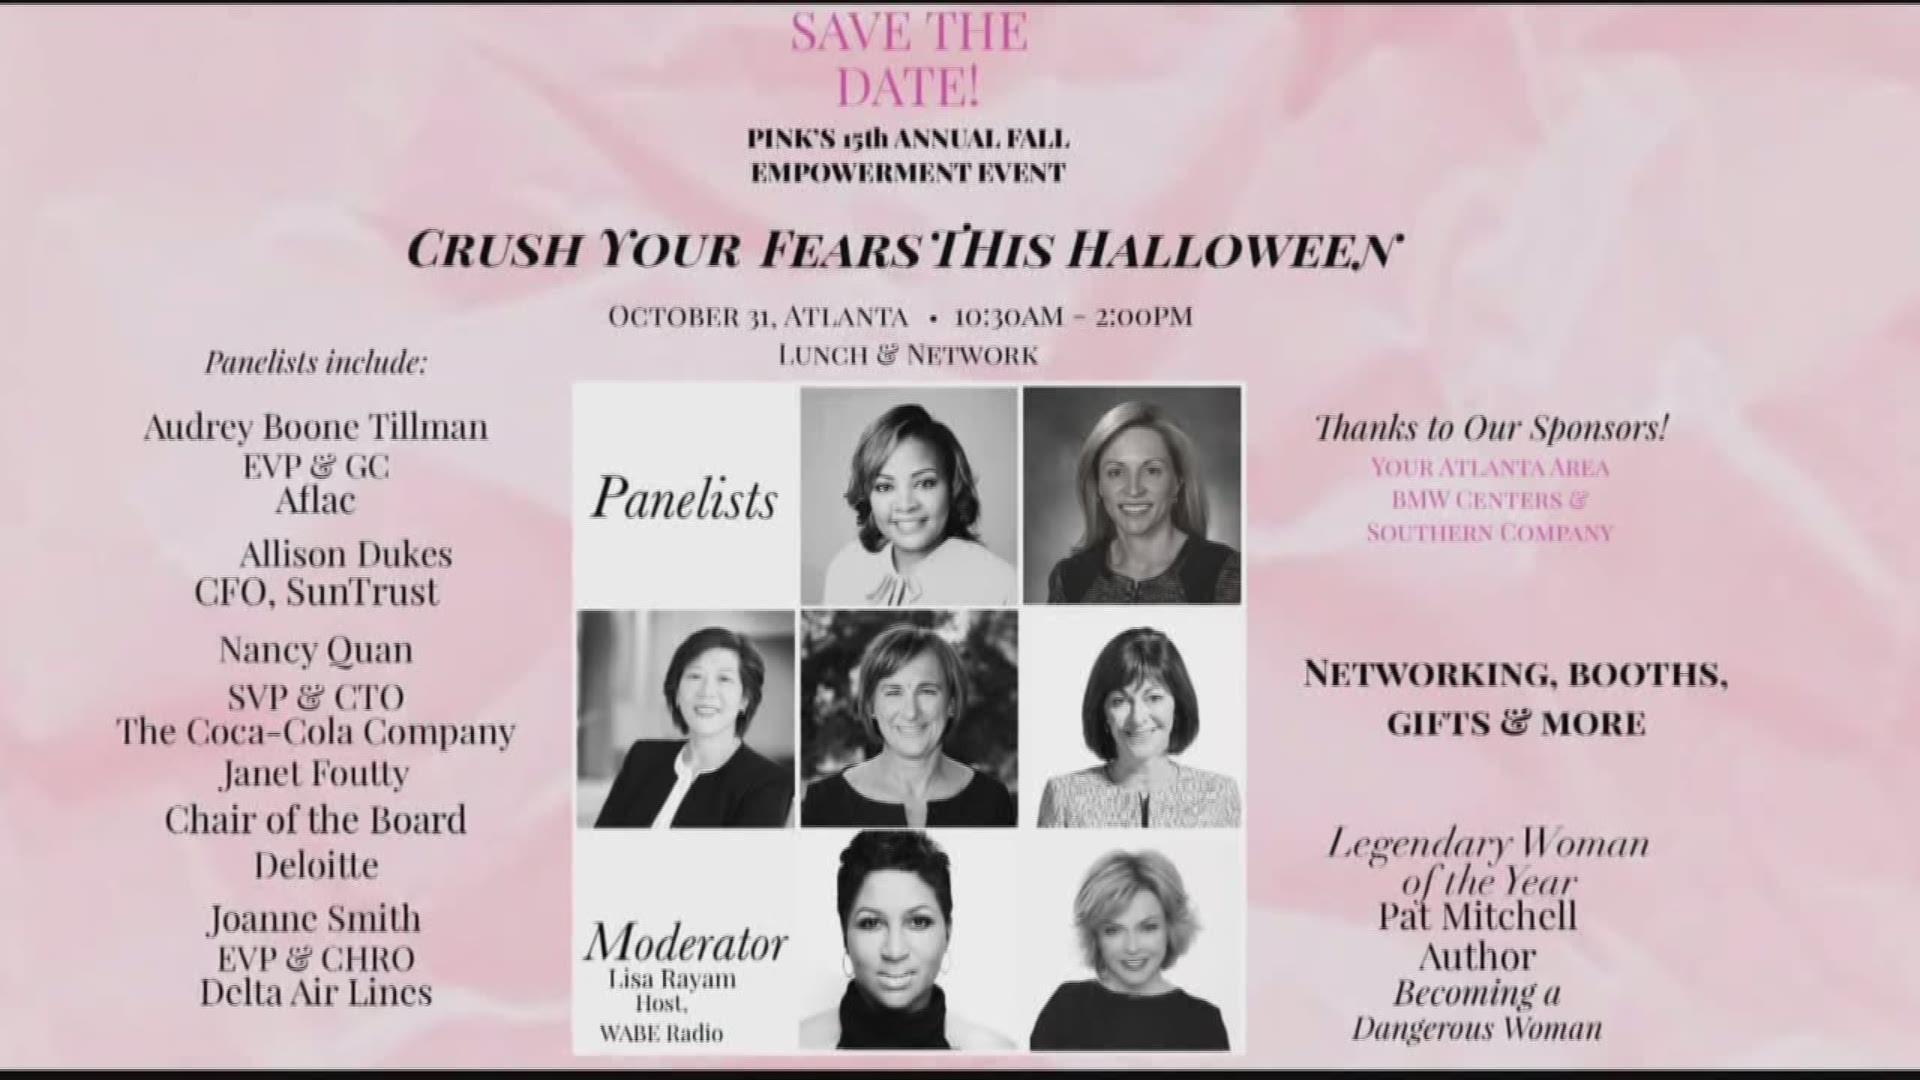 Preview the Little Pink Book's Top Women in Business Lunch coming up October 31.